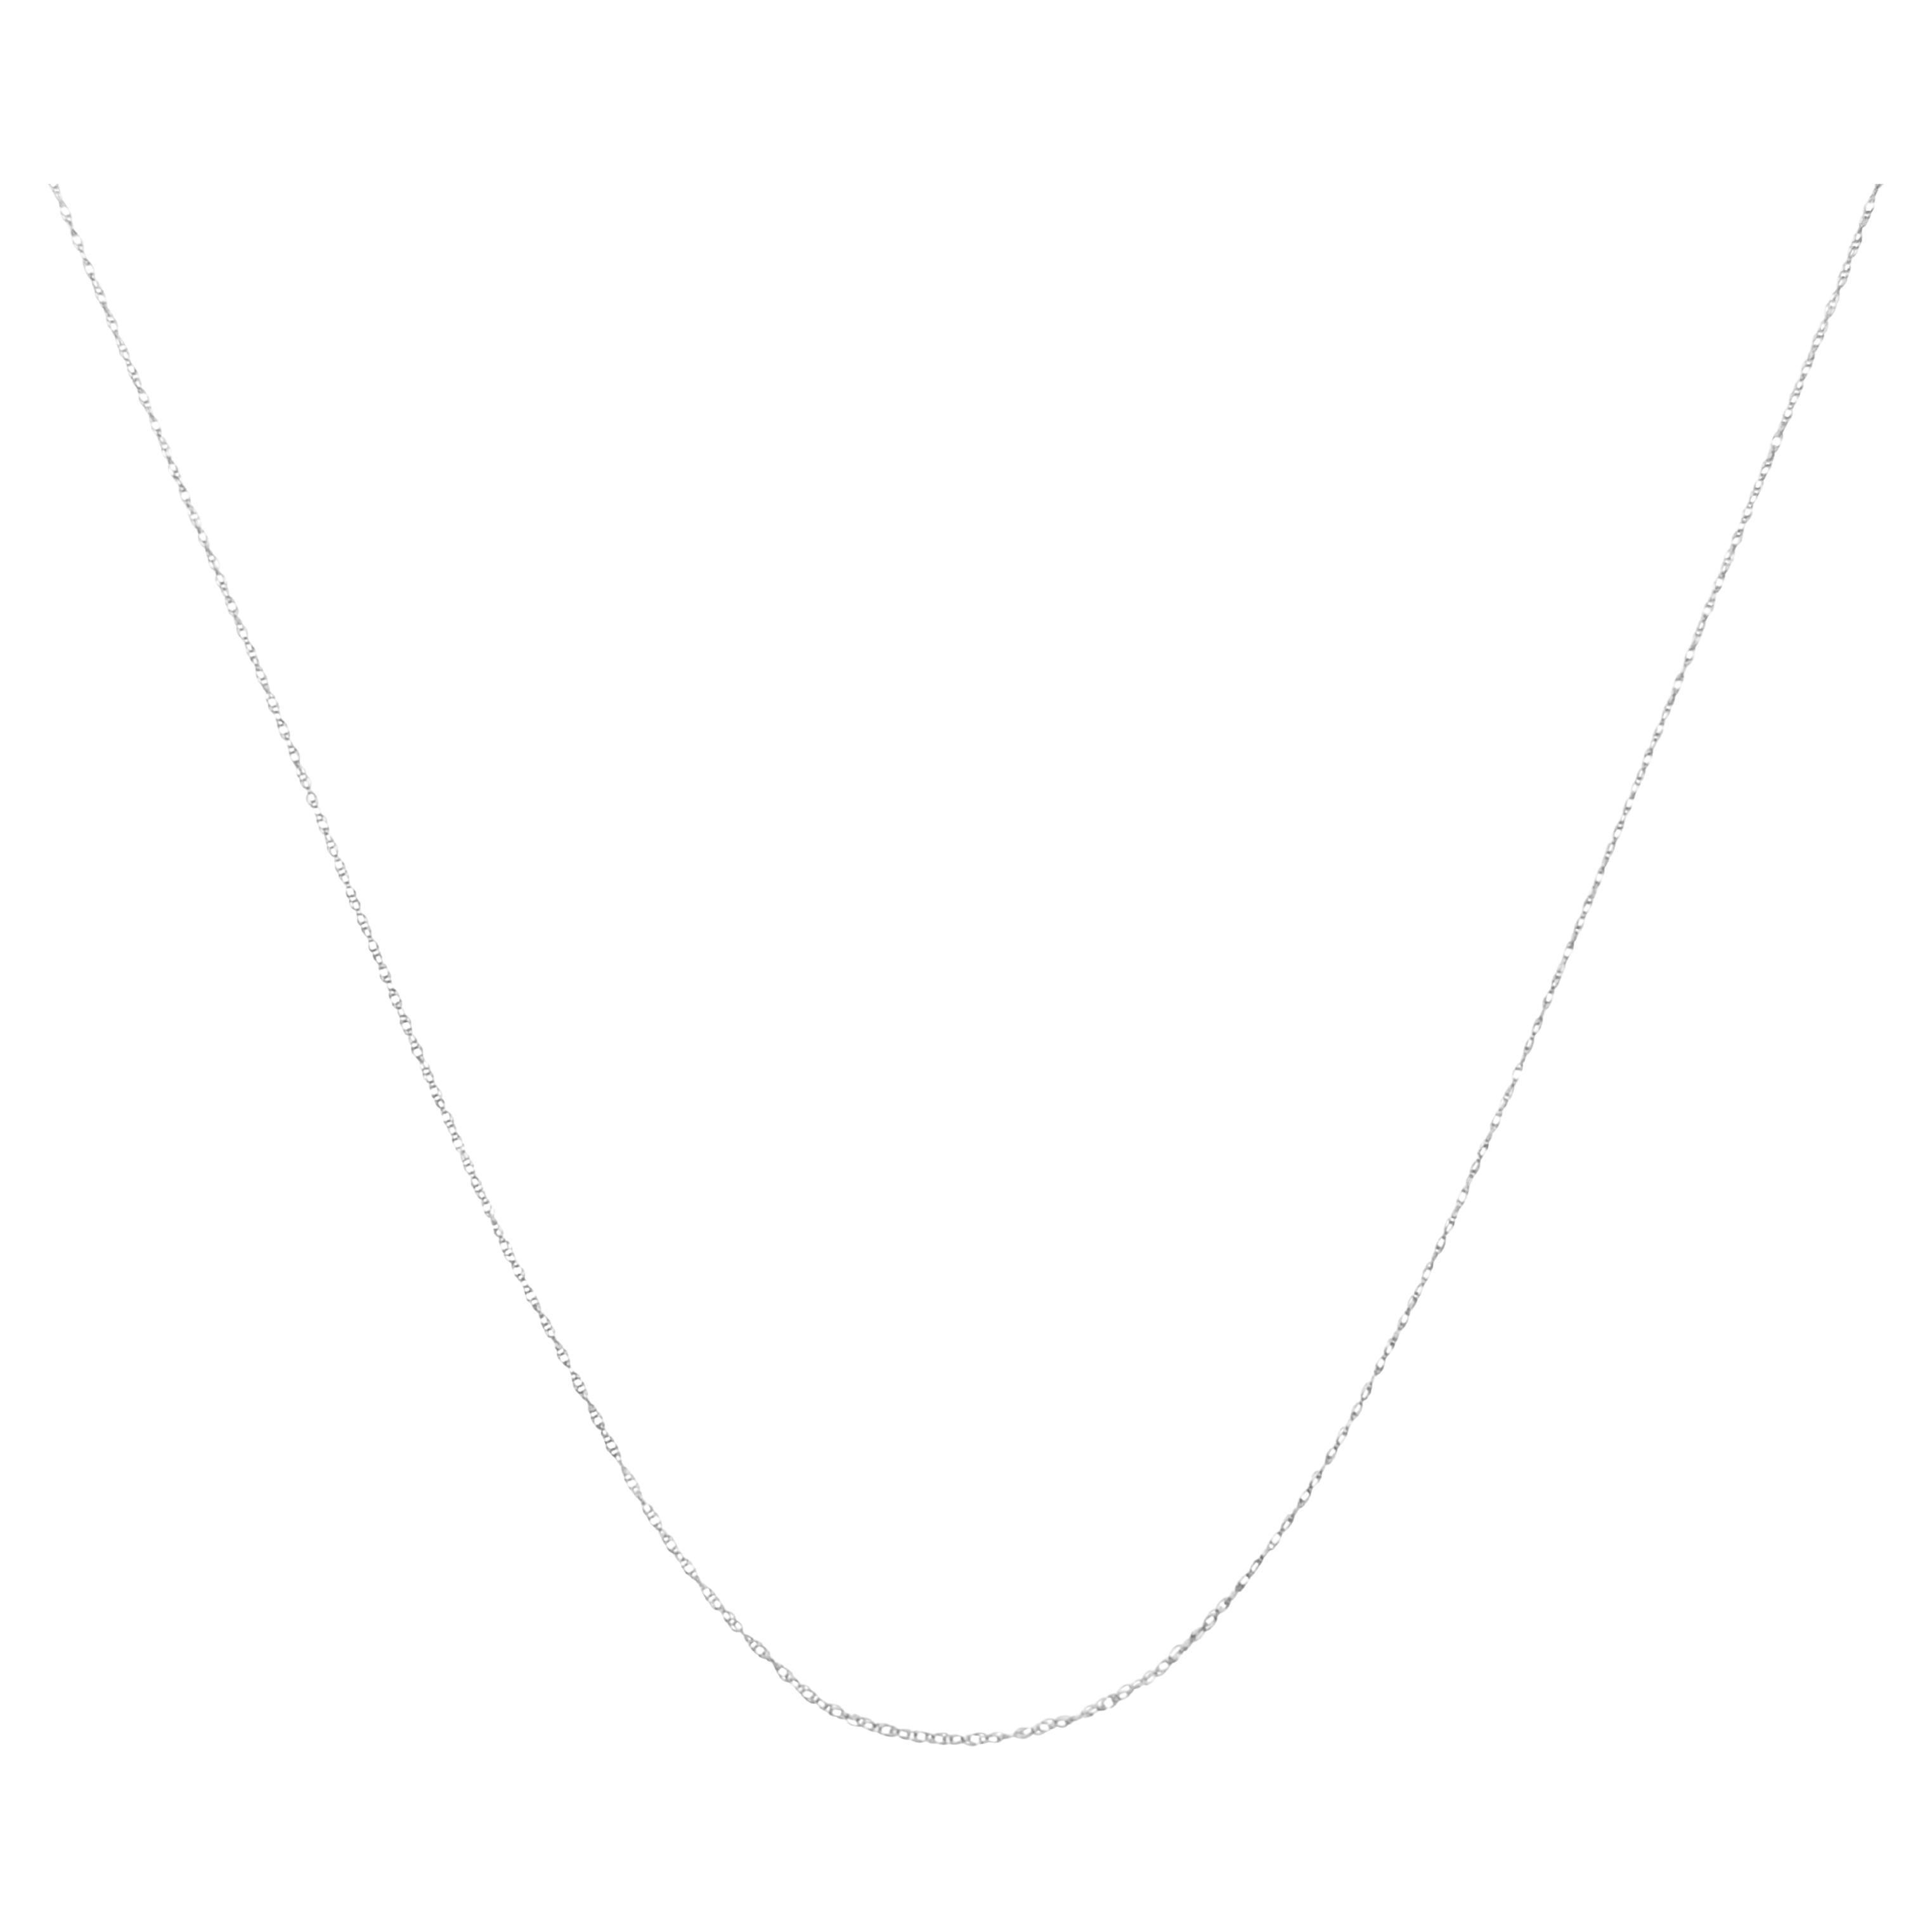 Solid 10K White Gold 0.5mm Rope Chain Necklace, Unisex Chain